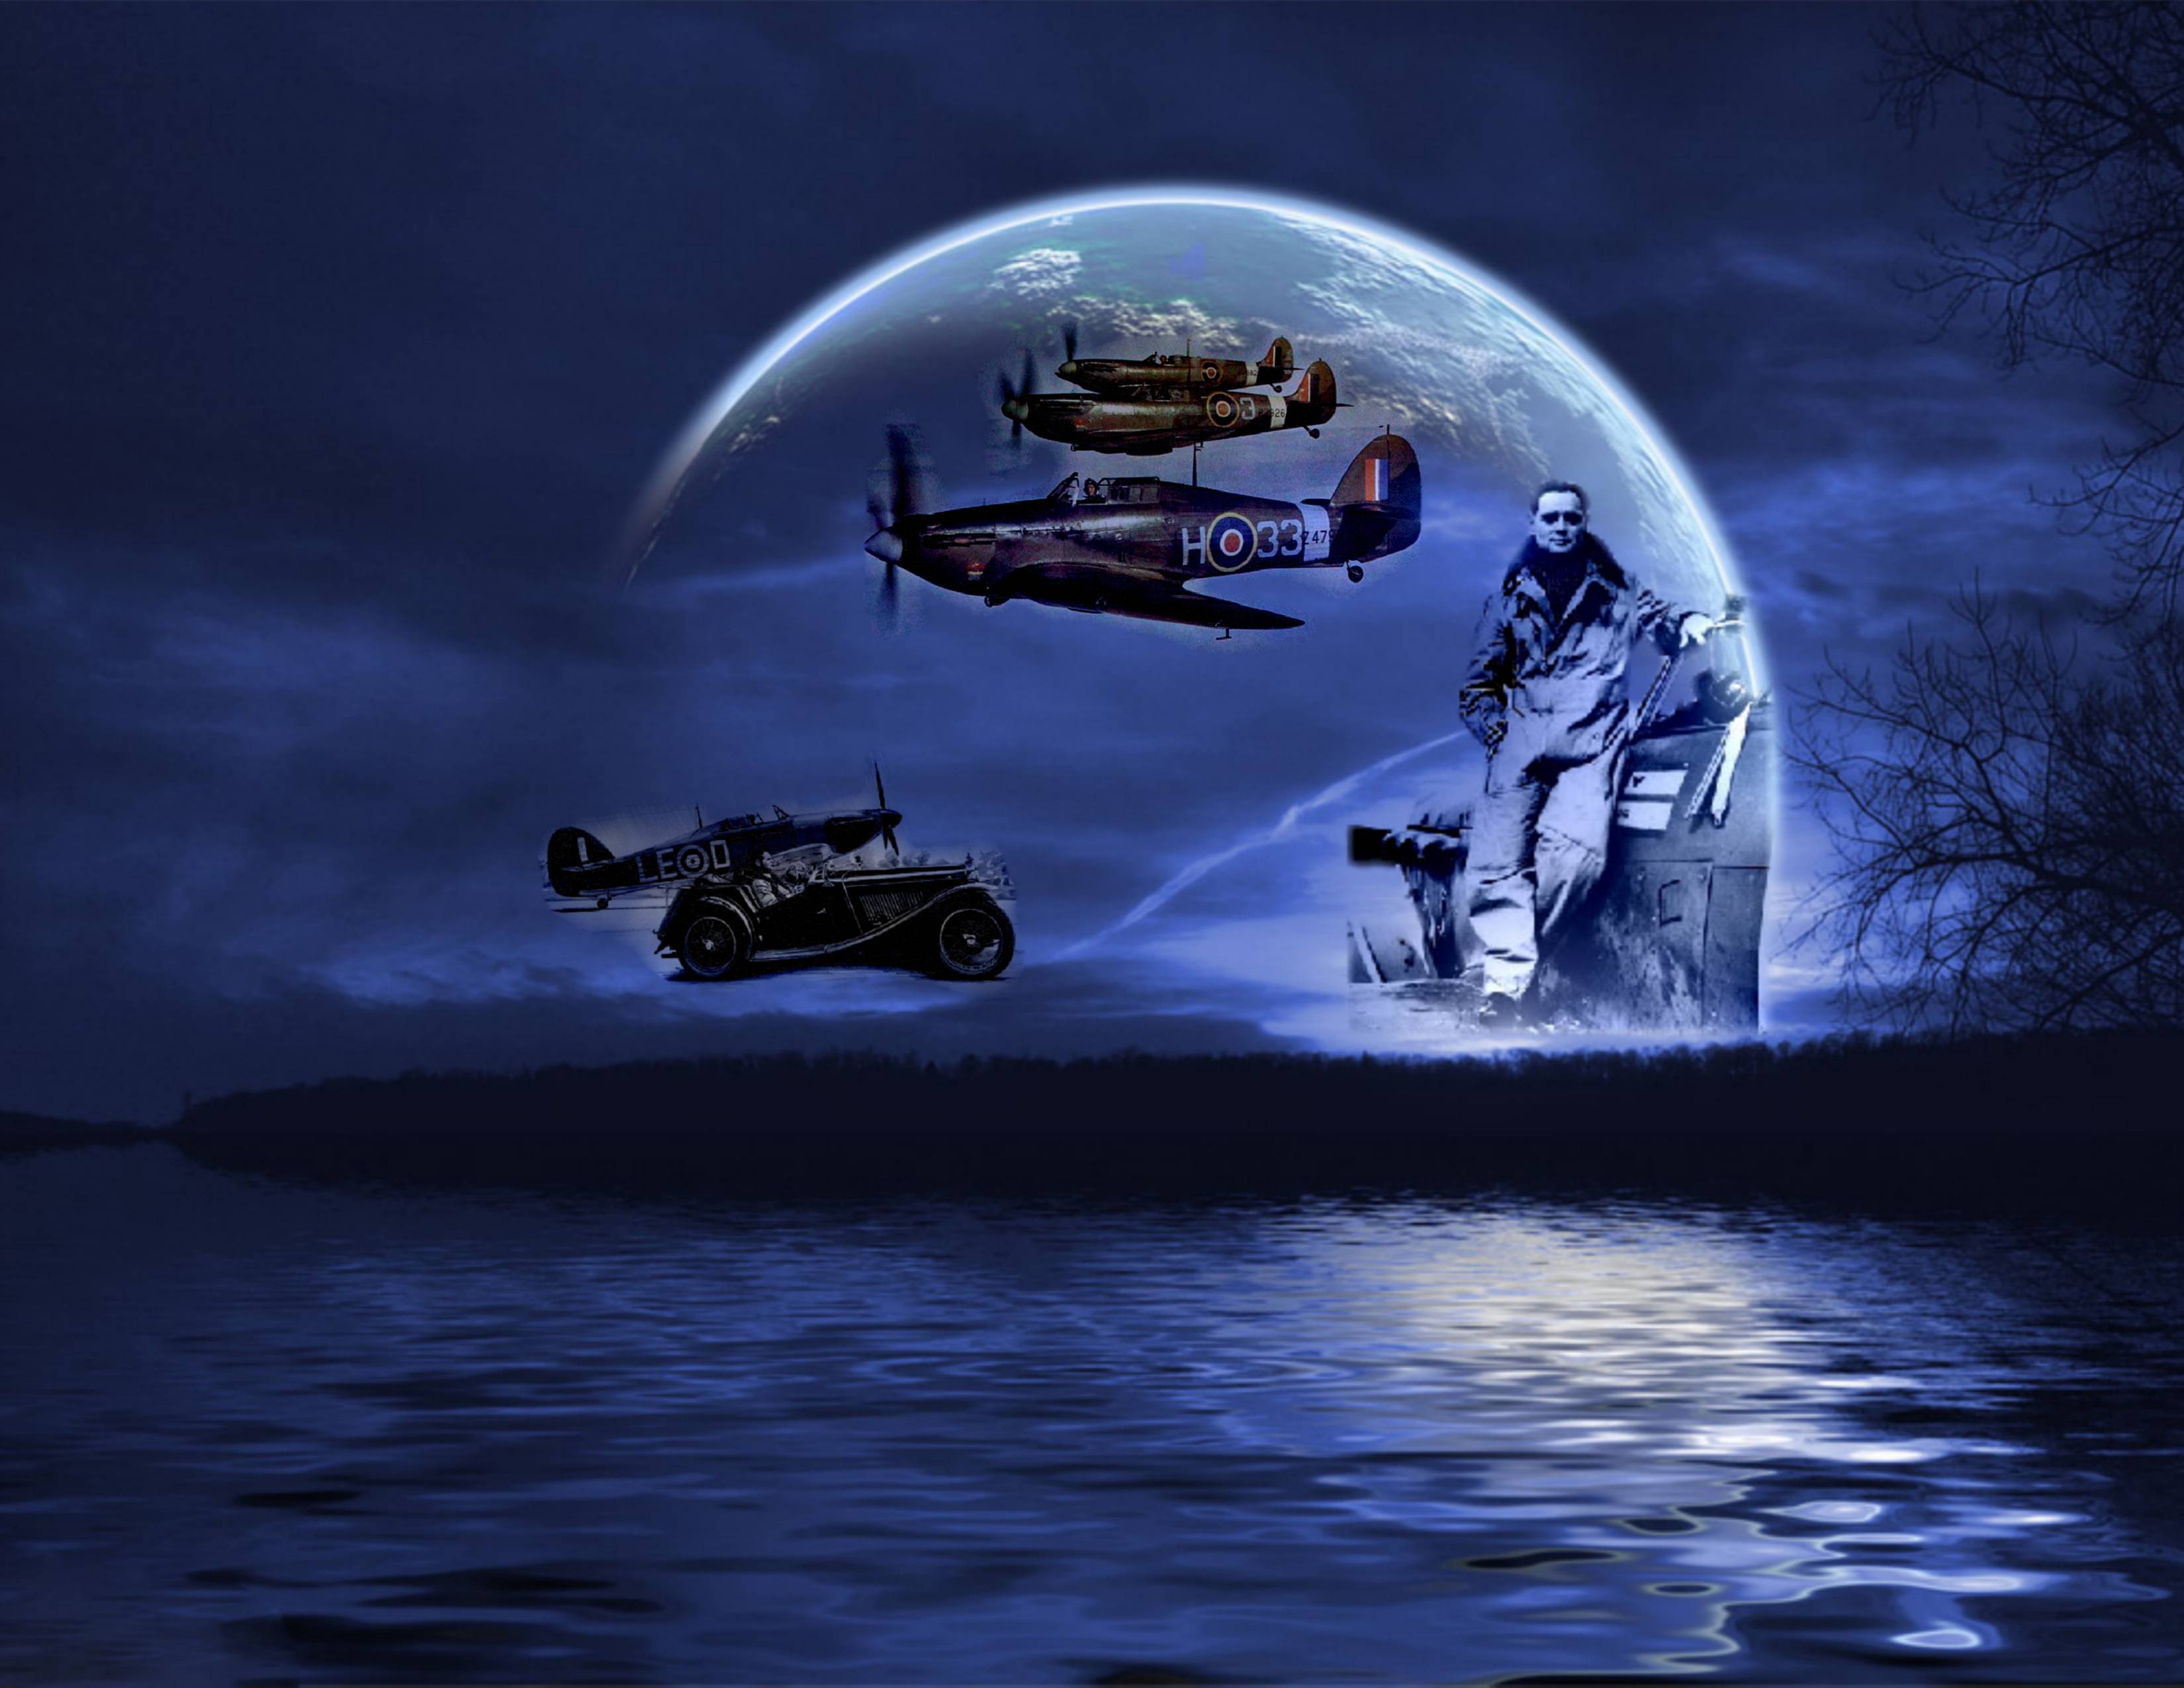 Tribute To Douglas Bader, Group Captain, RAF Wallpaper Background